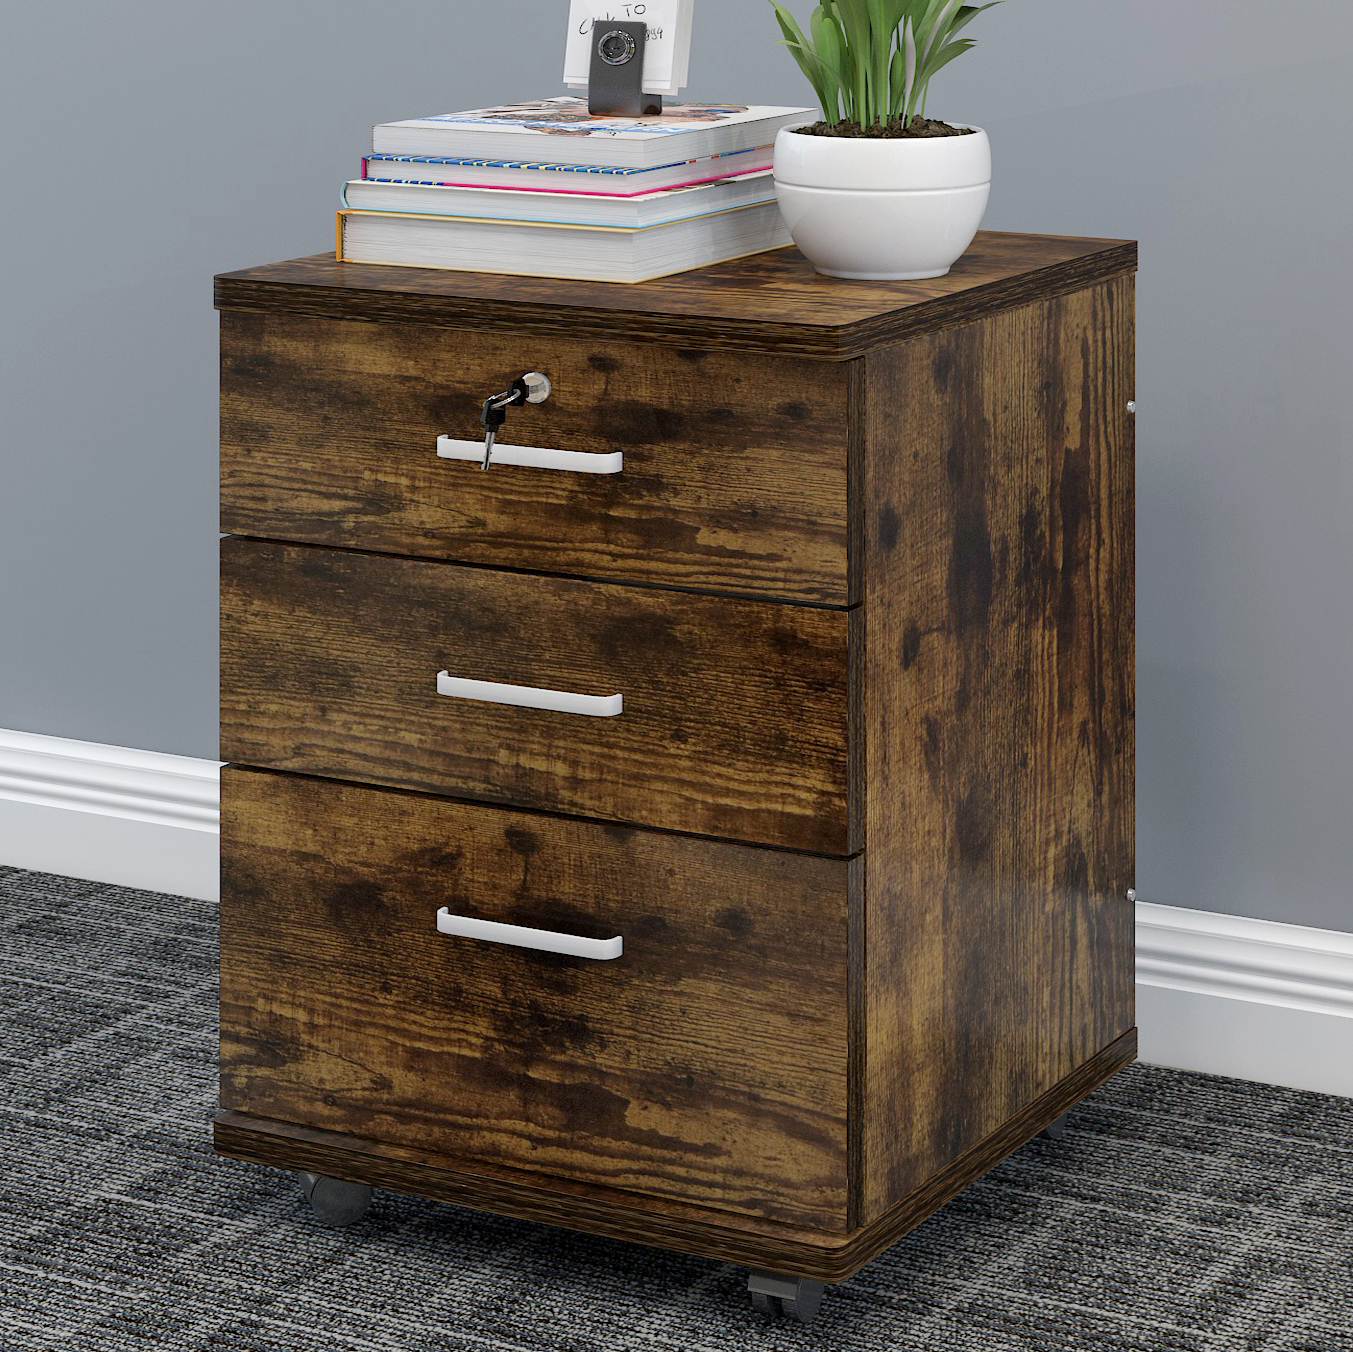 Miami 3 Drawer Bedside Table Cabinet with Wheels (Rustic Wood)